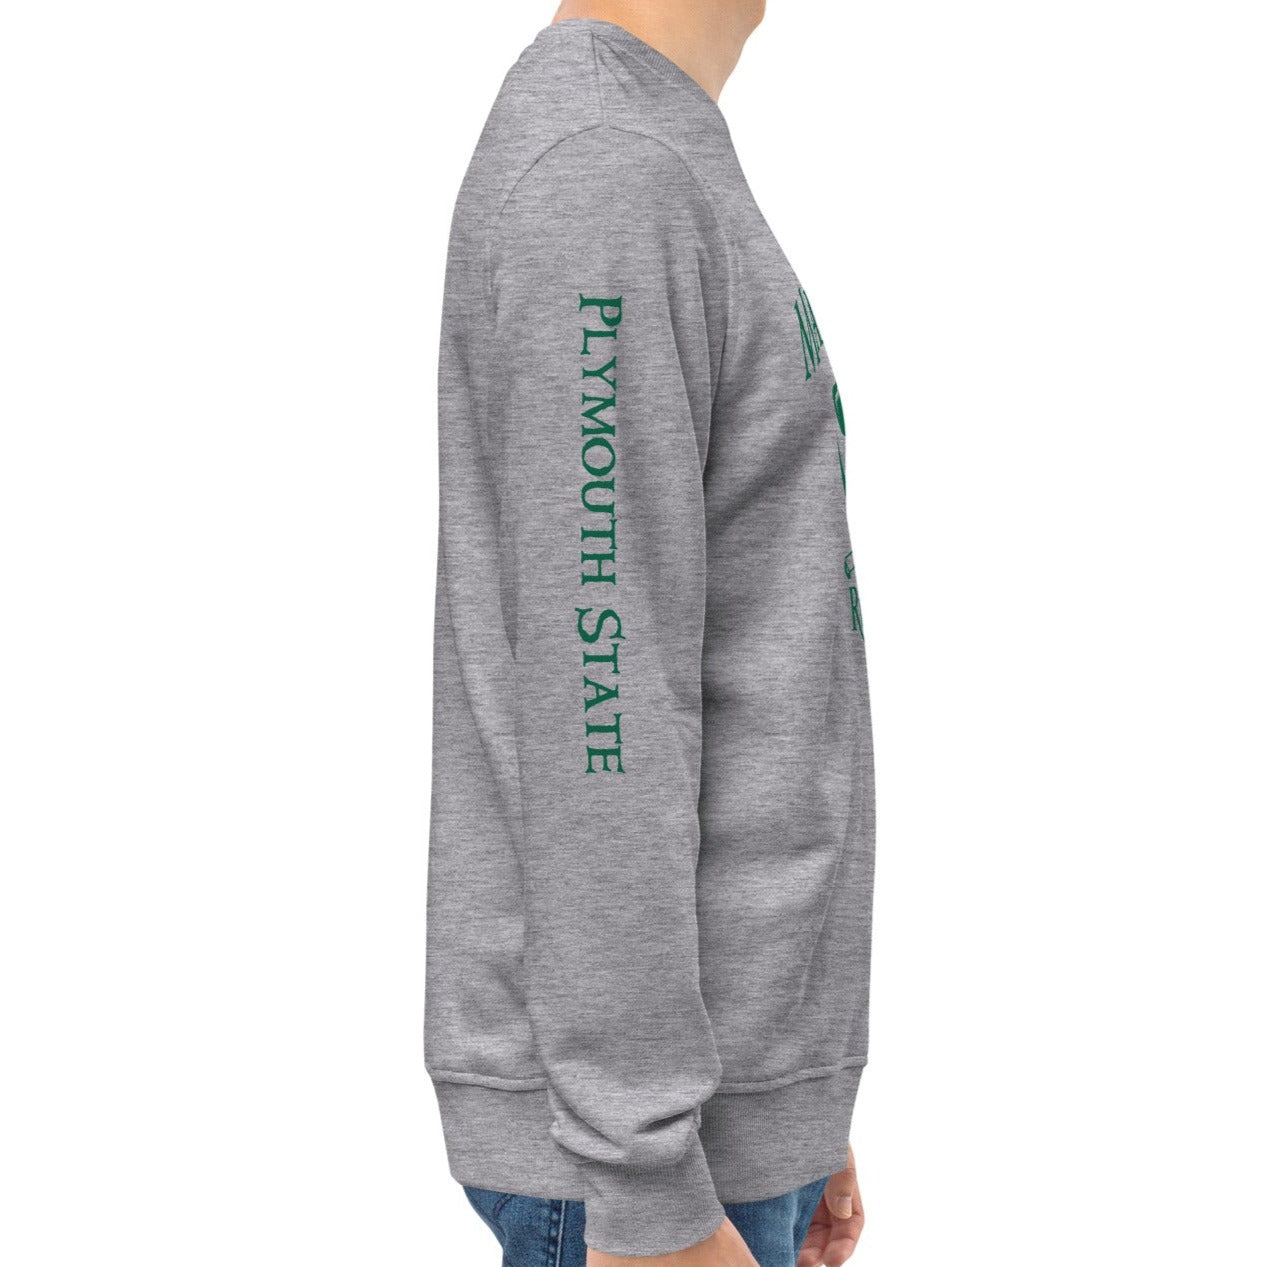 Rugby Imports Plymouth State WRFC Retro Crewneck